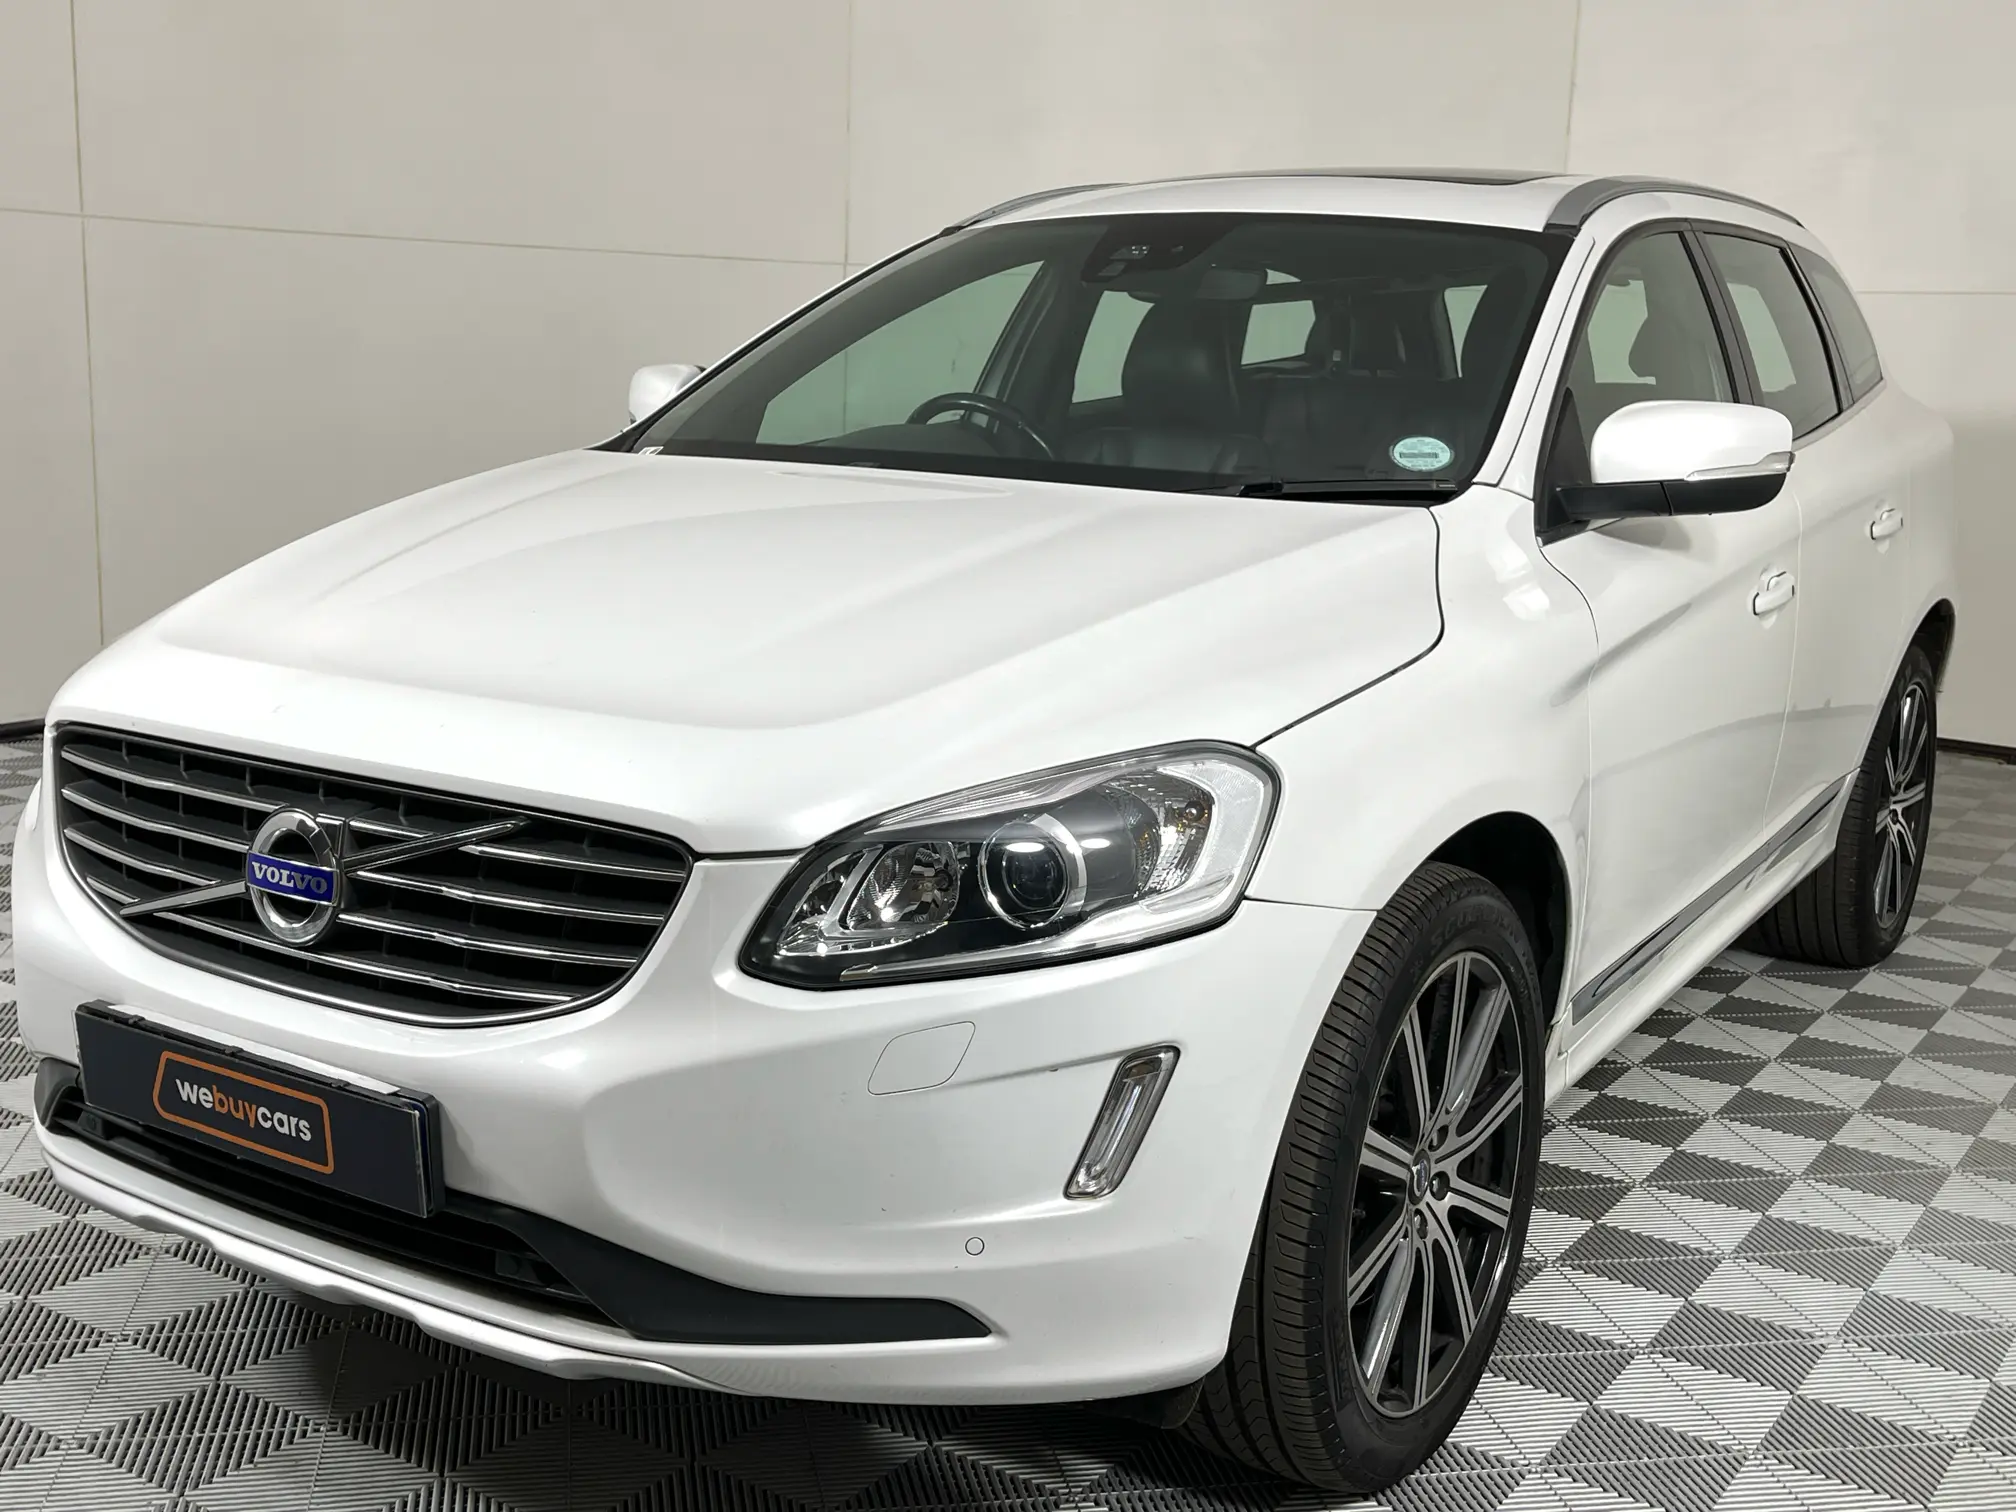 2014 Volvo Xc60 D4 Excel Geartronic